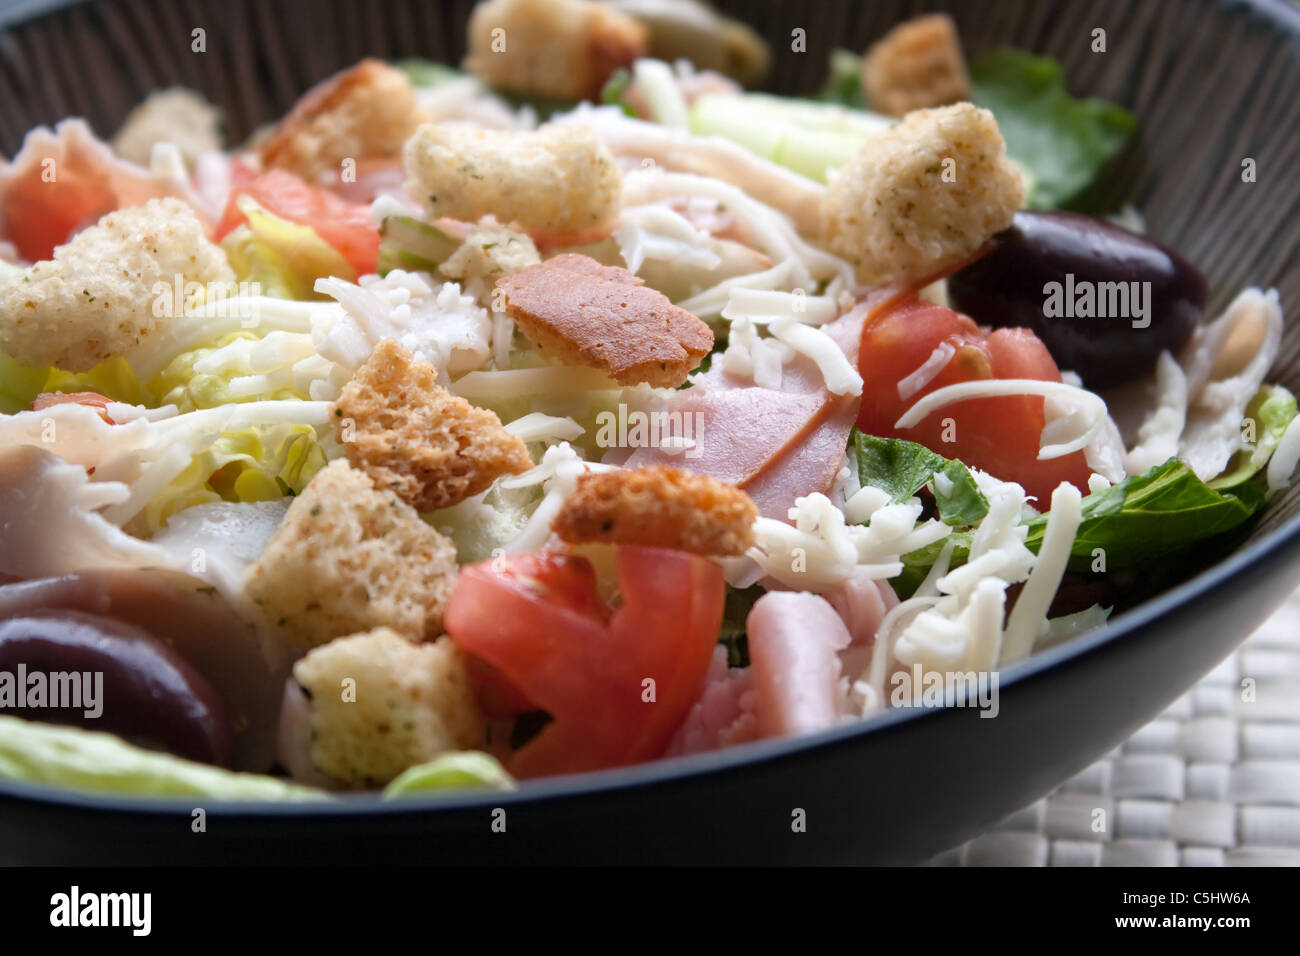 A delicious looking tossed chefs salad or antipasto with meat cheese and croutons. Stock Photo